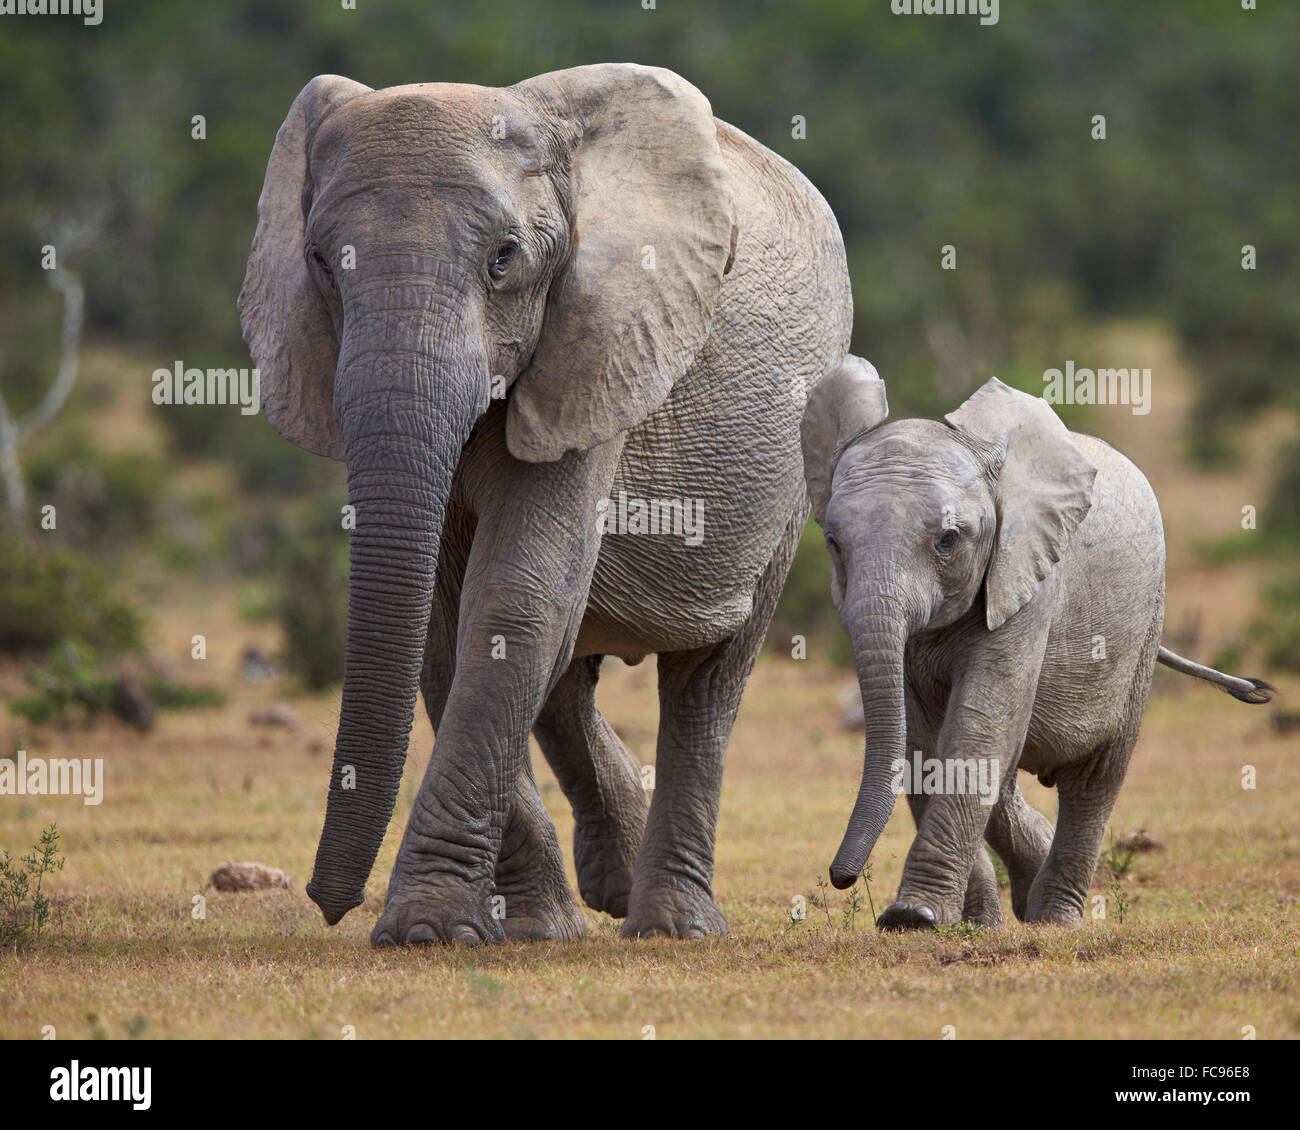 African elephant (Loxodonta africana) adult and young, Addo Elephant National Park, South Africa, Africa Stock Photo